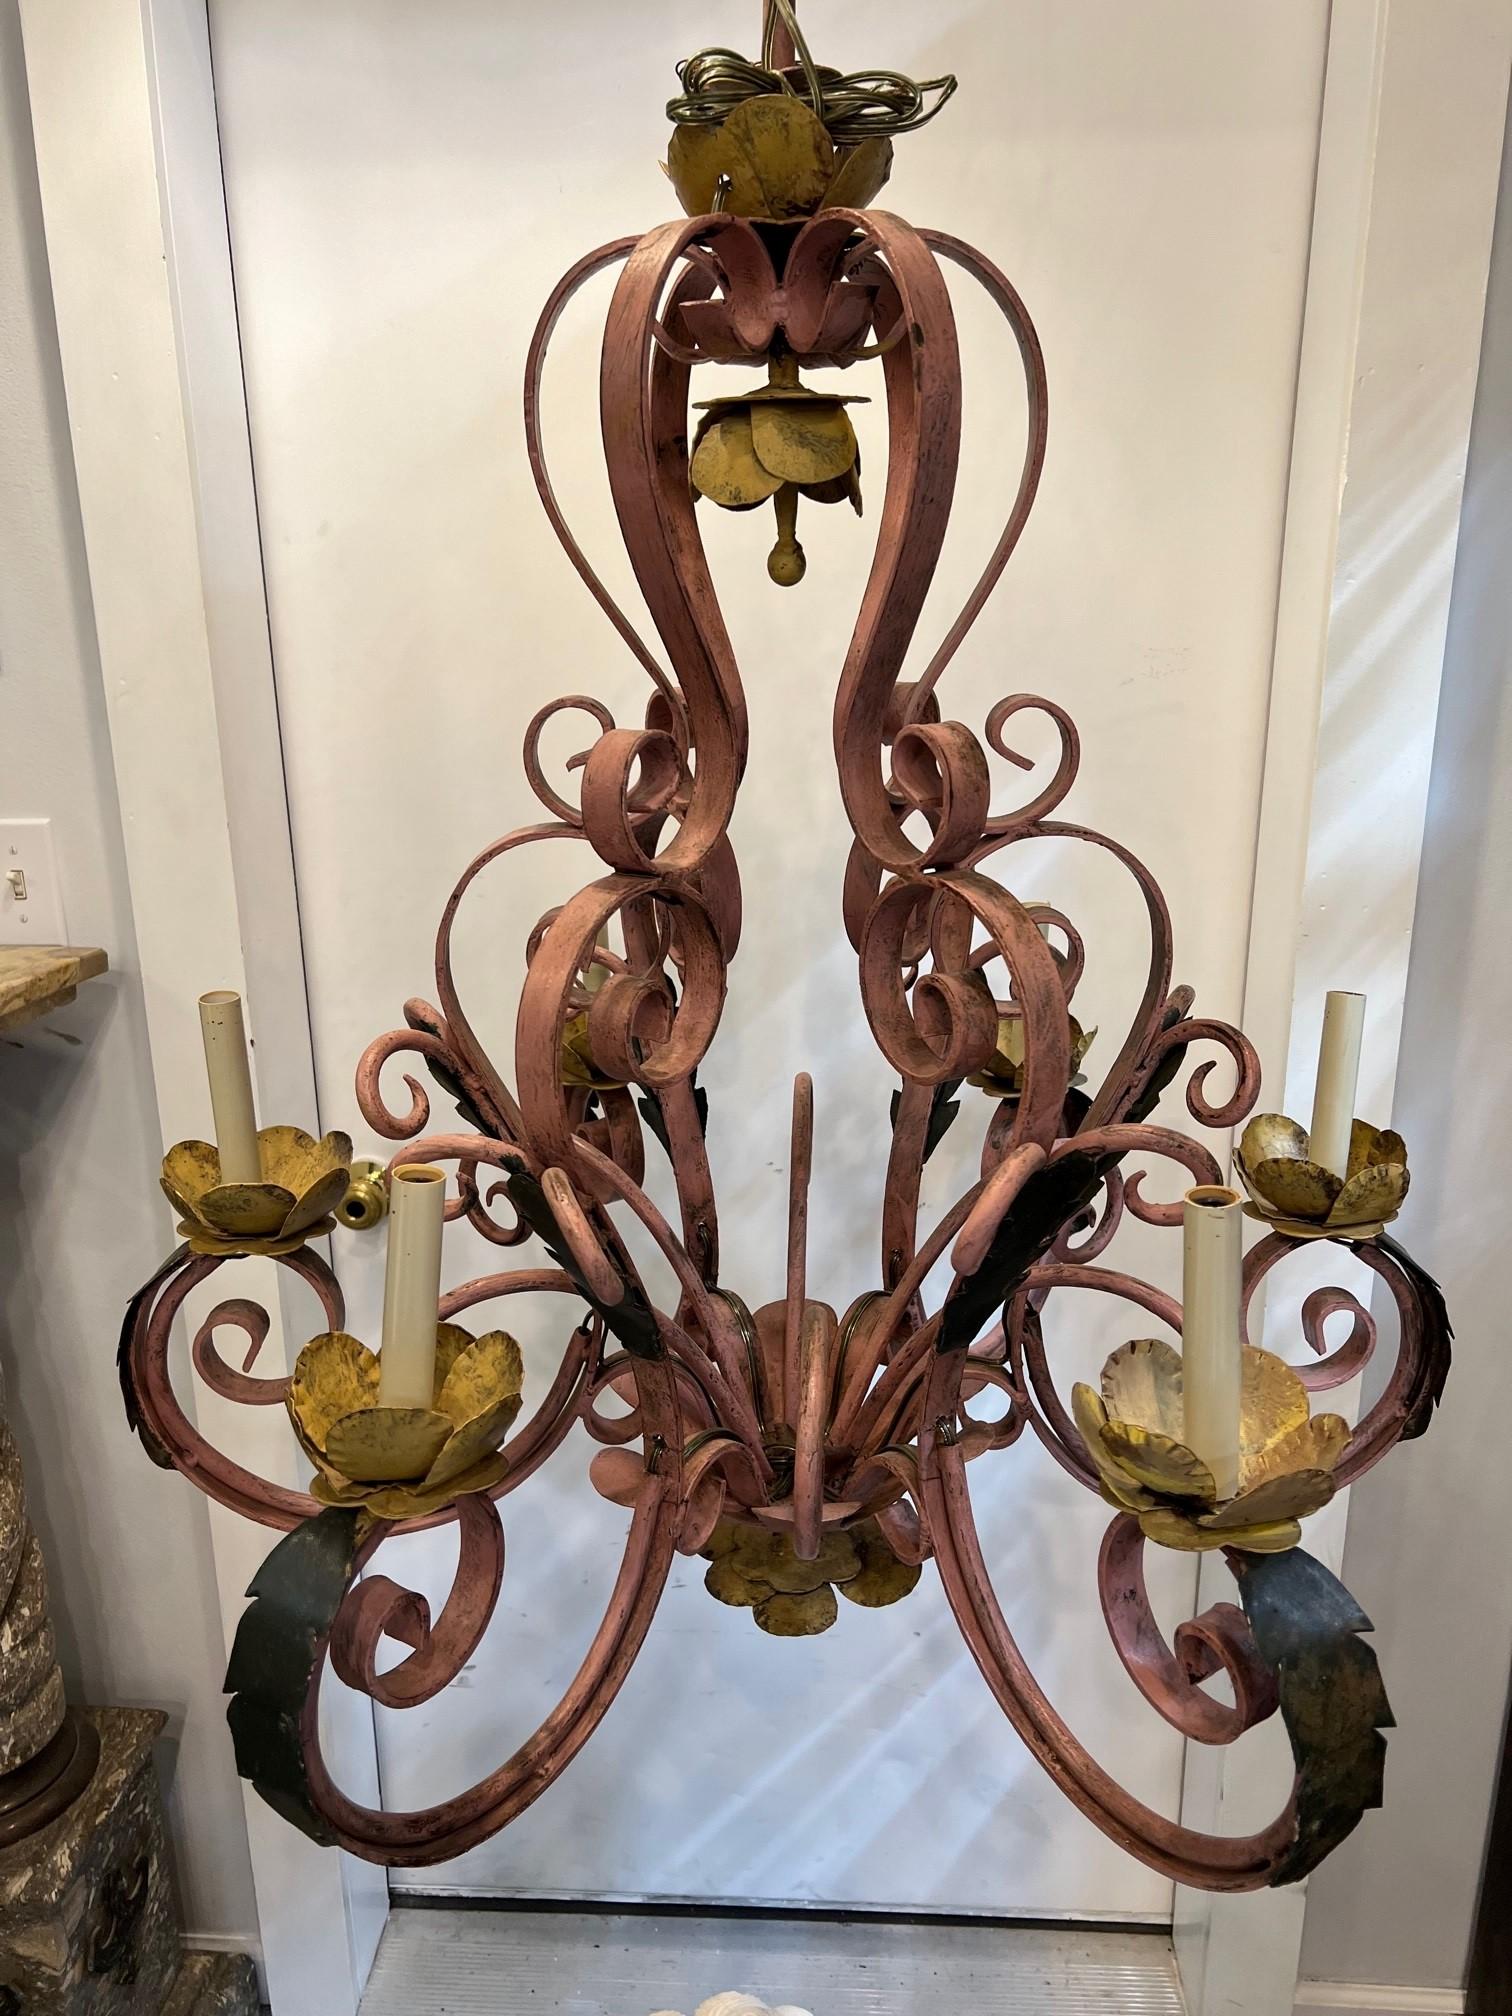 Rustic French style wrought iron six light chandelier. This is a nice heavy iron chandelier with acanthus leaf design and iron scroll work. It's a good size with a colorful painted finish that has been recently wired for chandelier bulbs. Would look